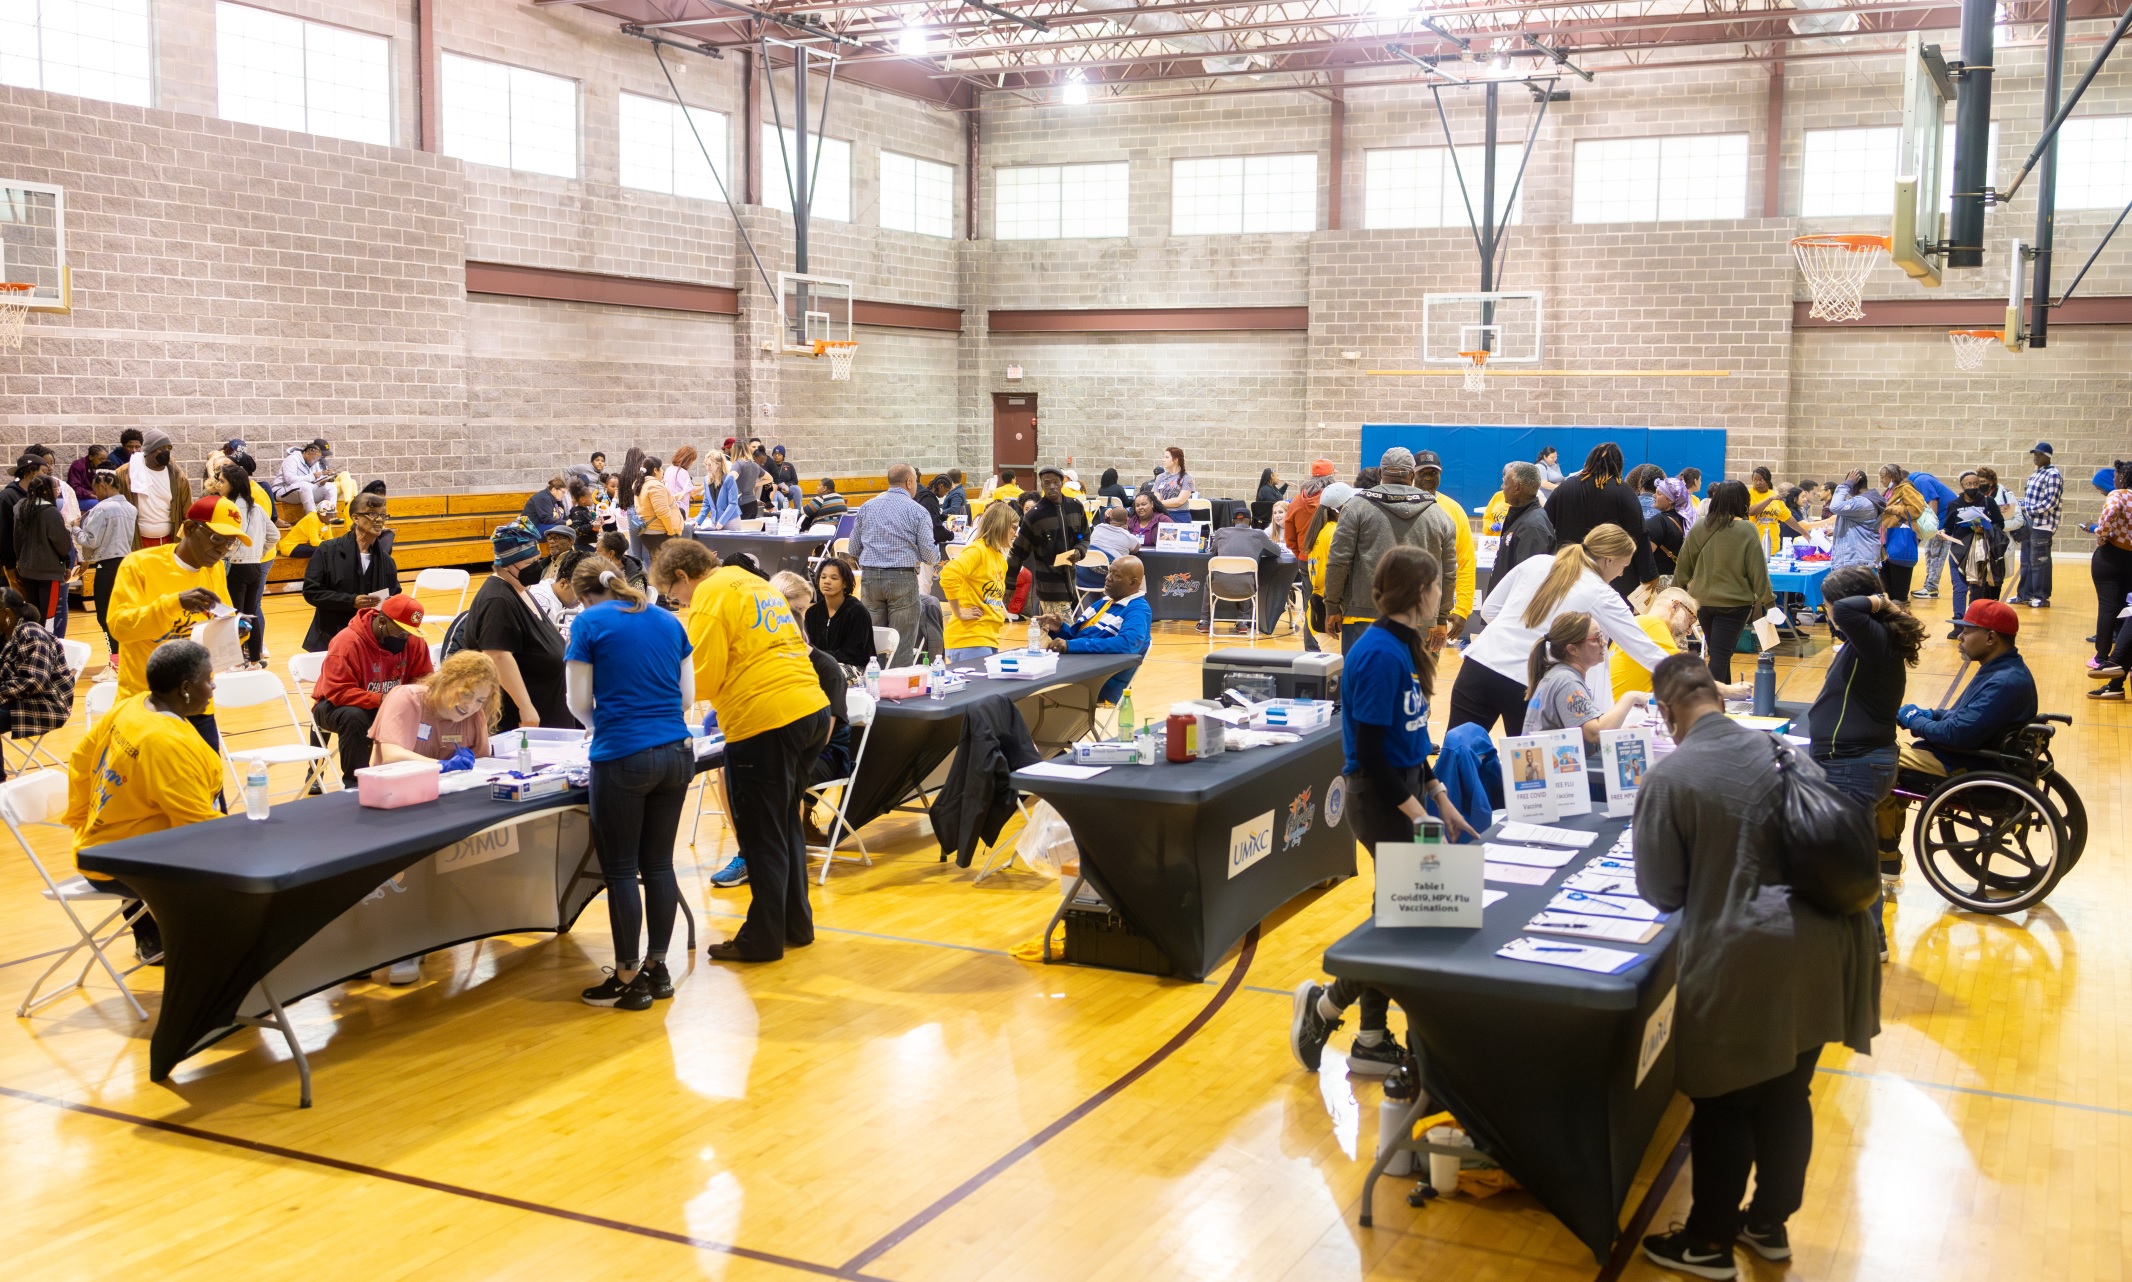 A gymnasium filled with people getting vaccinations, blood pressure checks and more while enjoying family entertainment